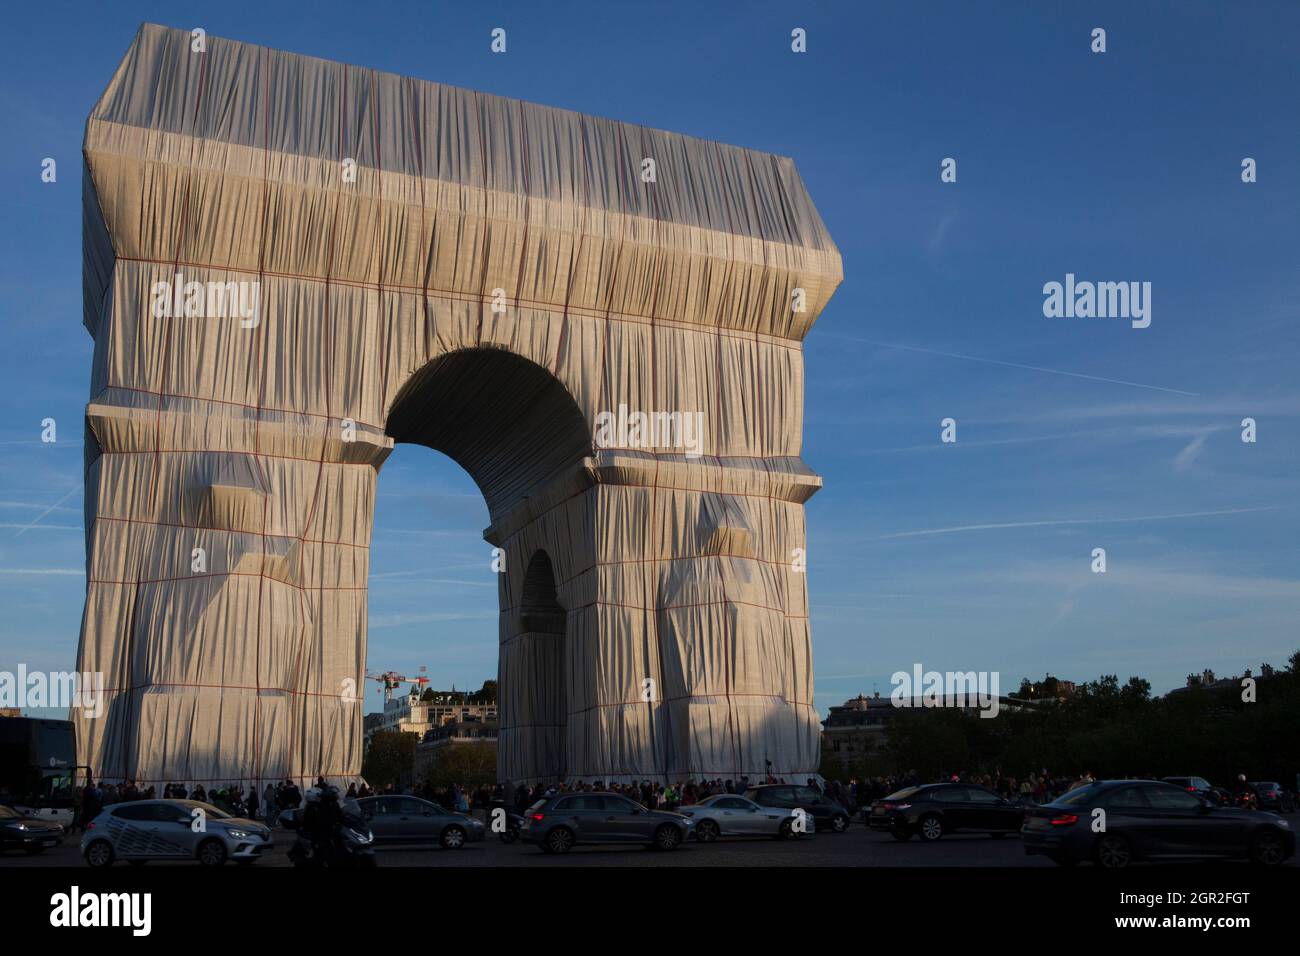 Paris, France, 30 September 2021: The Arc de Triomphe in Paris, wrapped in silver fabric as planned by artists Christo and Jeanne-Claude, and attracting a steady stream of tourists. This weekend the Place Charles de Gaulle surrounding the arch will be closed to traffic, allowing safer sight-seeing than for those who grabbed some shots from the middle of the boulevards radiating from the roundabout. The art installation will be dismantled from Monday 4th October to allow for Armistice Day celebrations to take place as normal. Anna Watson/Alamy Live News Stock Photo